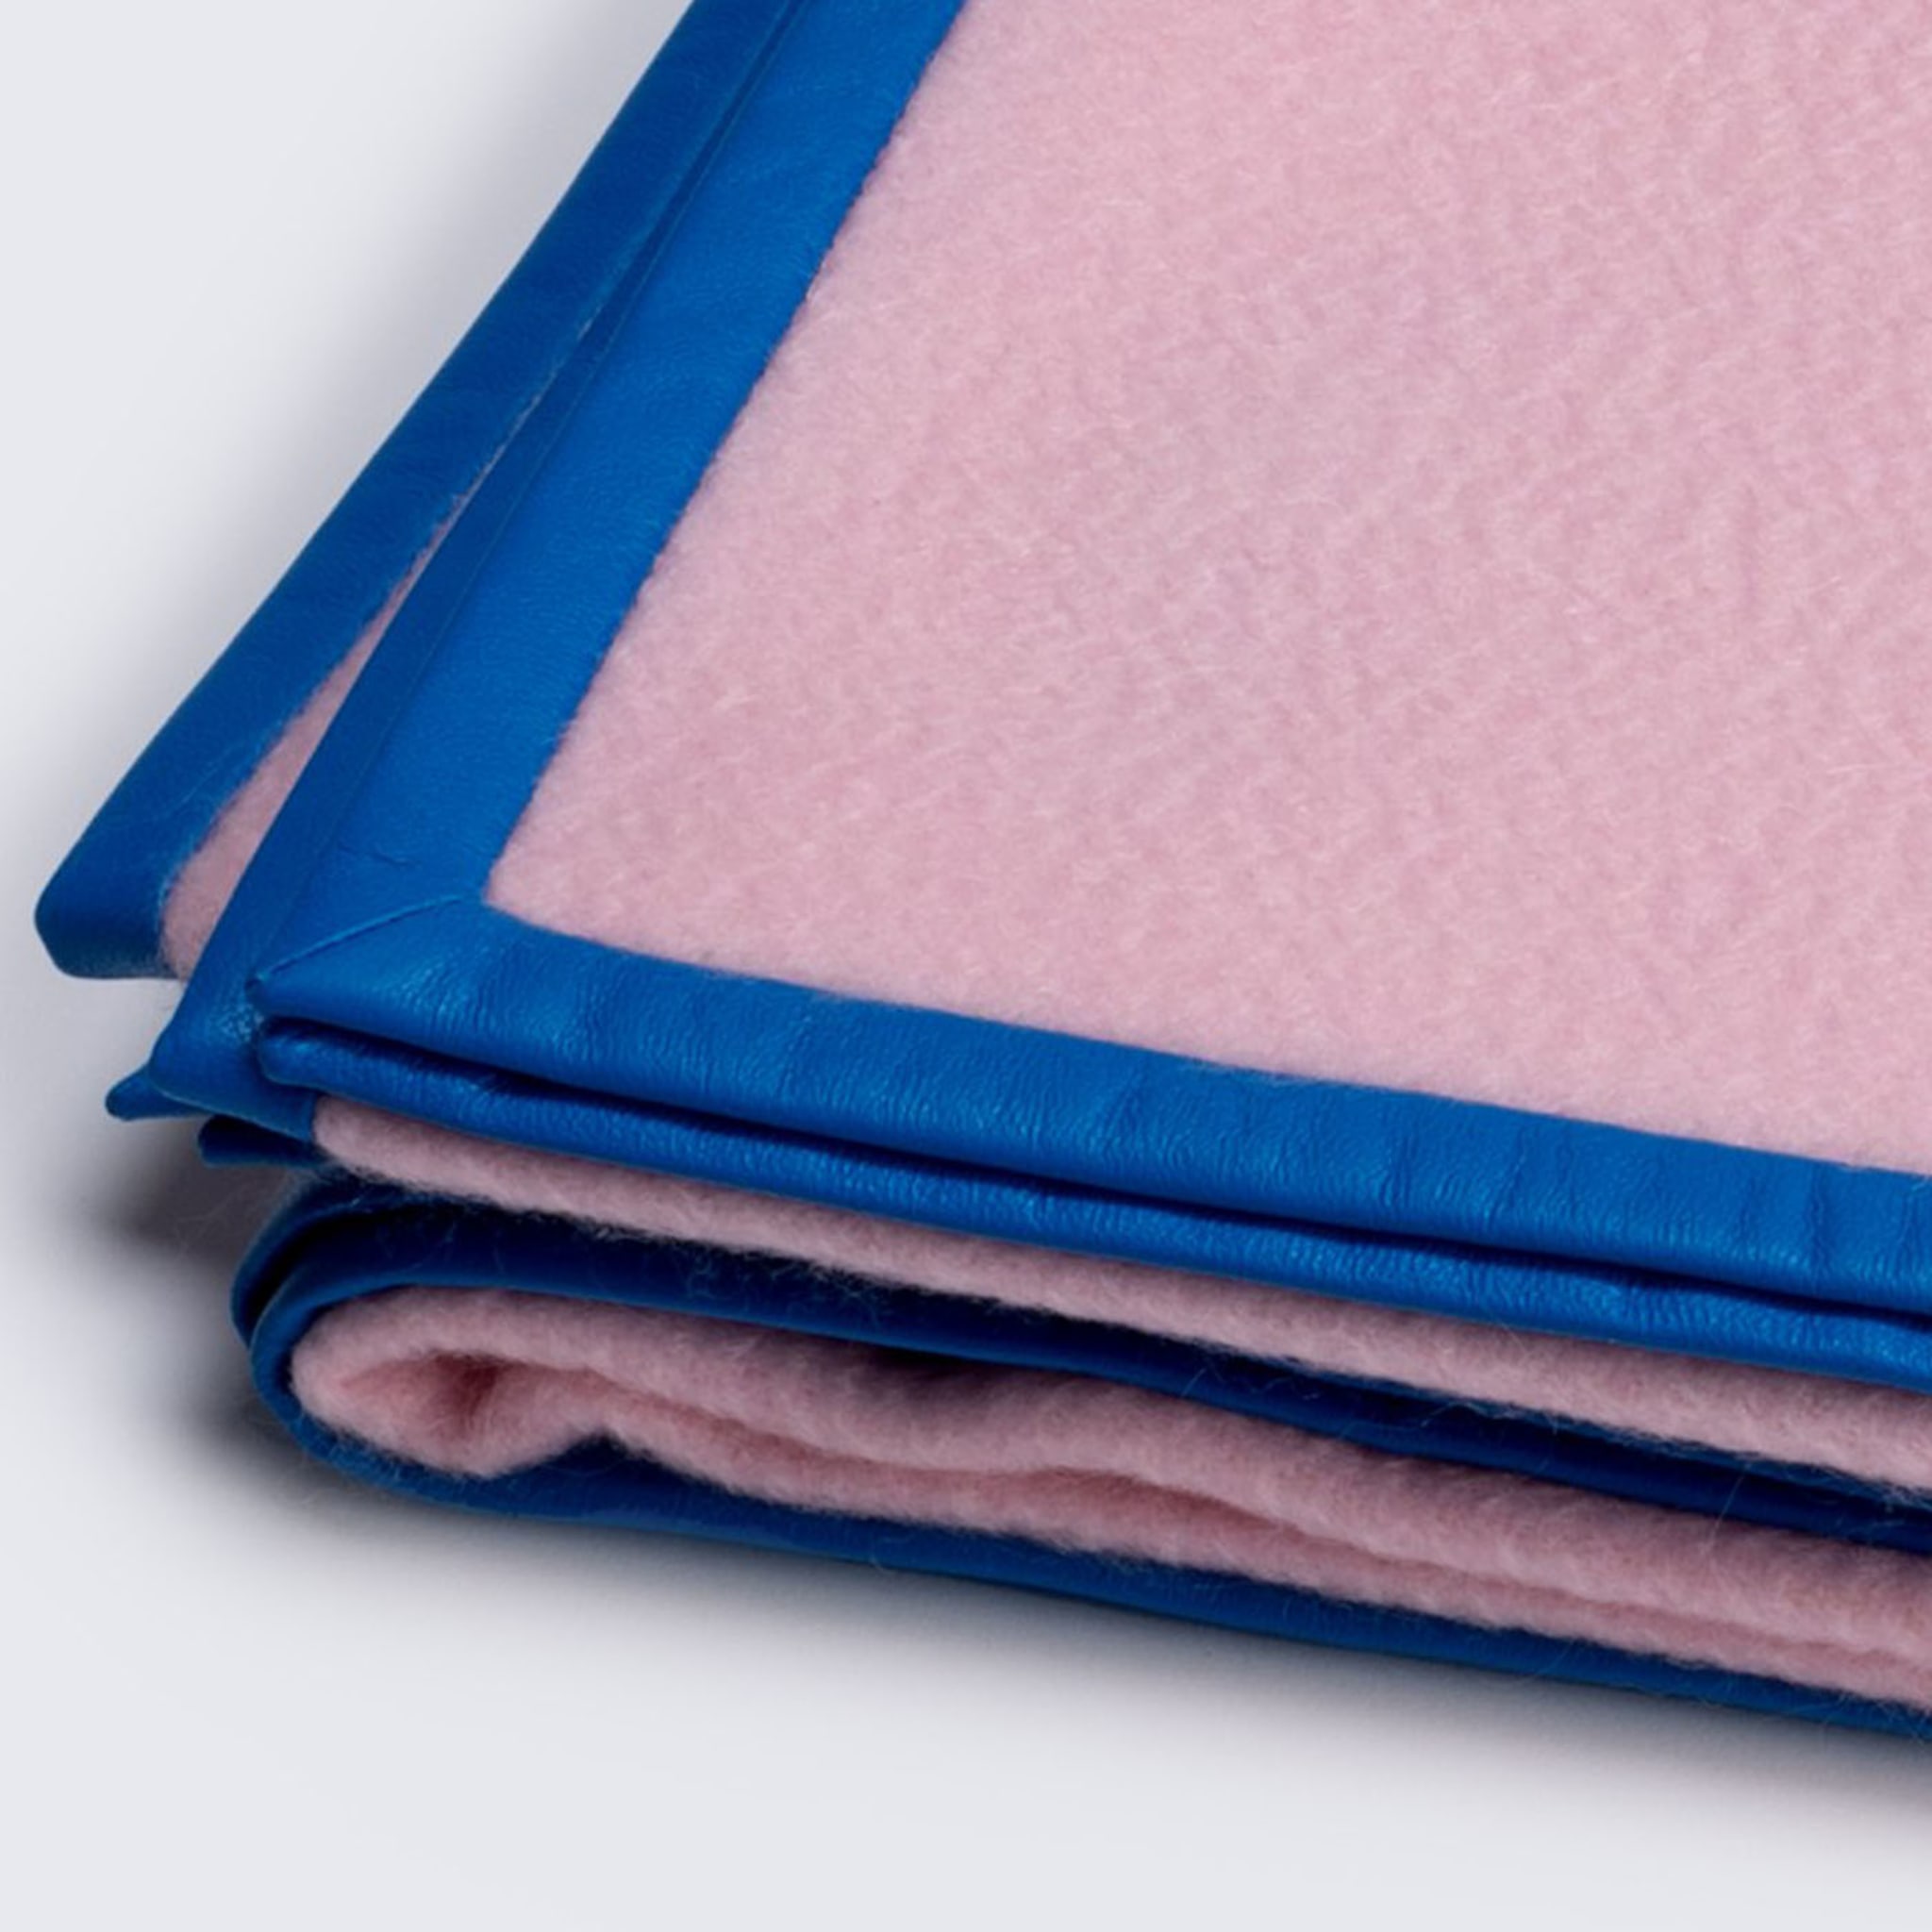 Biella Blue Leather and Pink Blanket - Alternative view 2